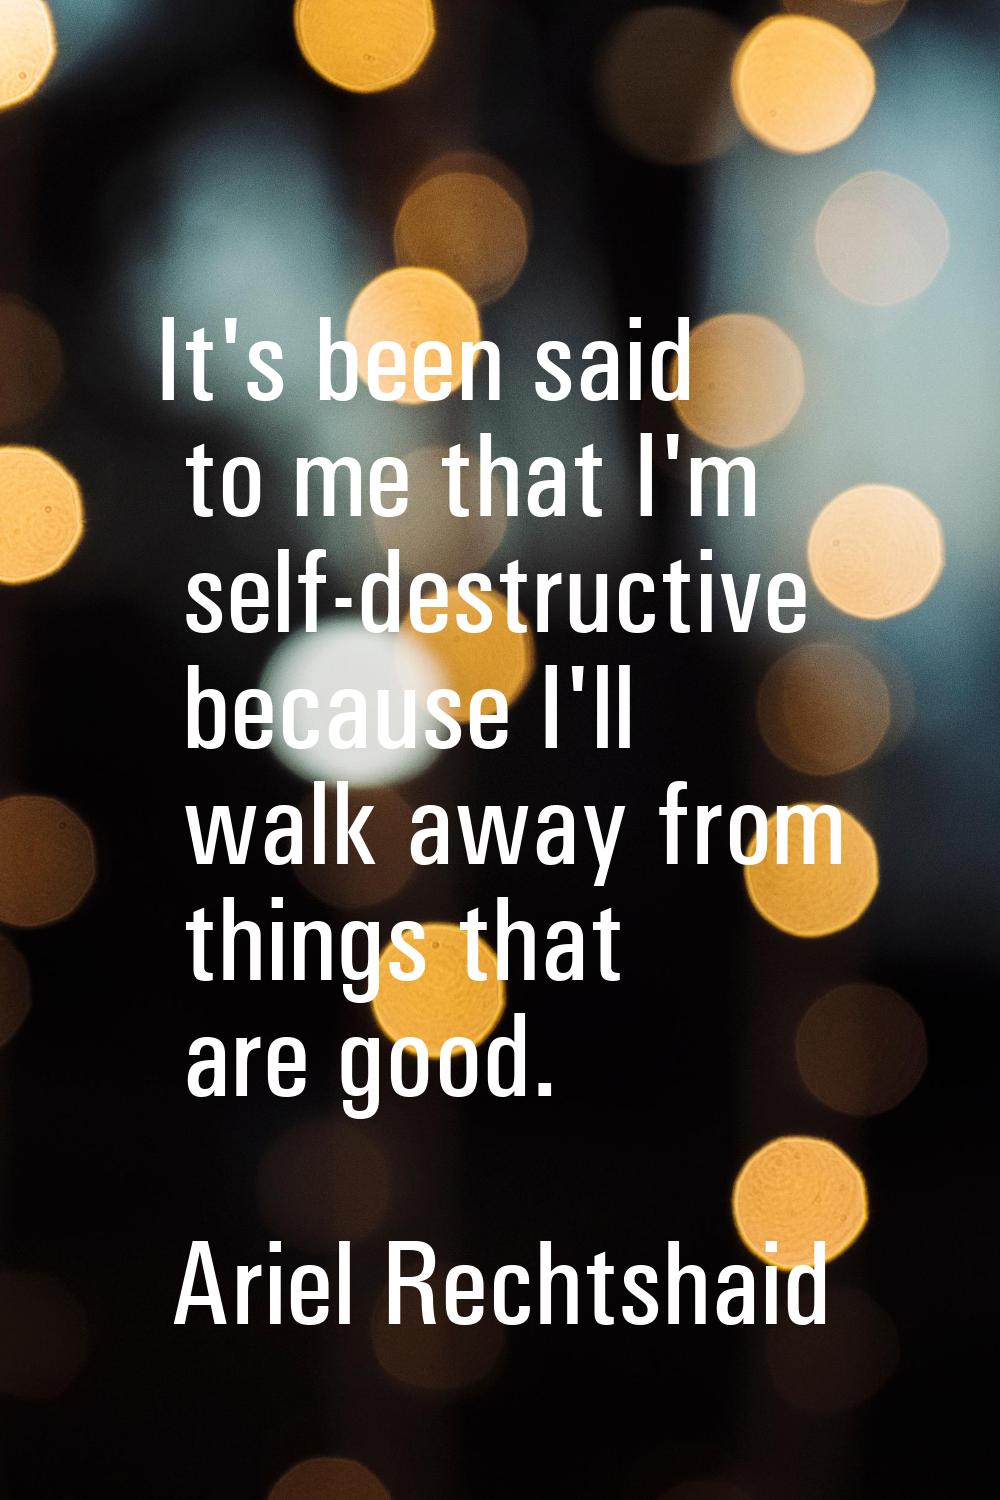 It's been said to me that I'm self-destructive because I'll walk away from things that are good.